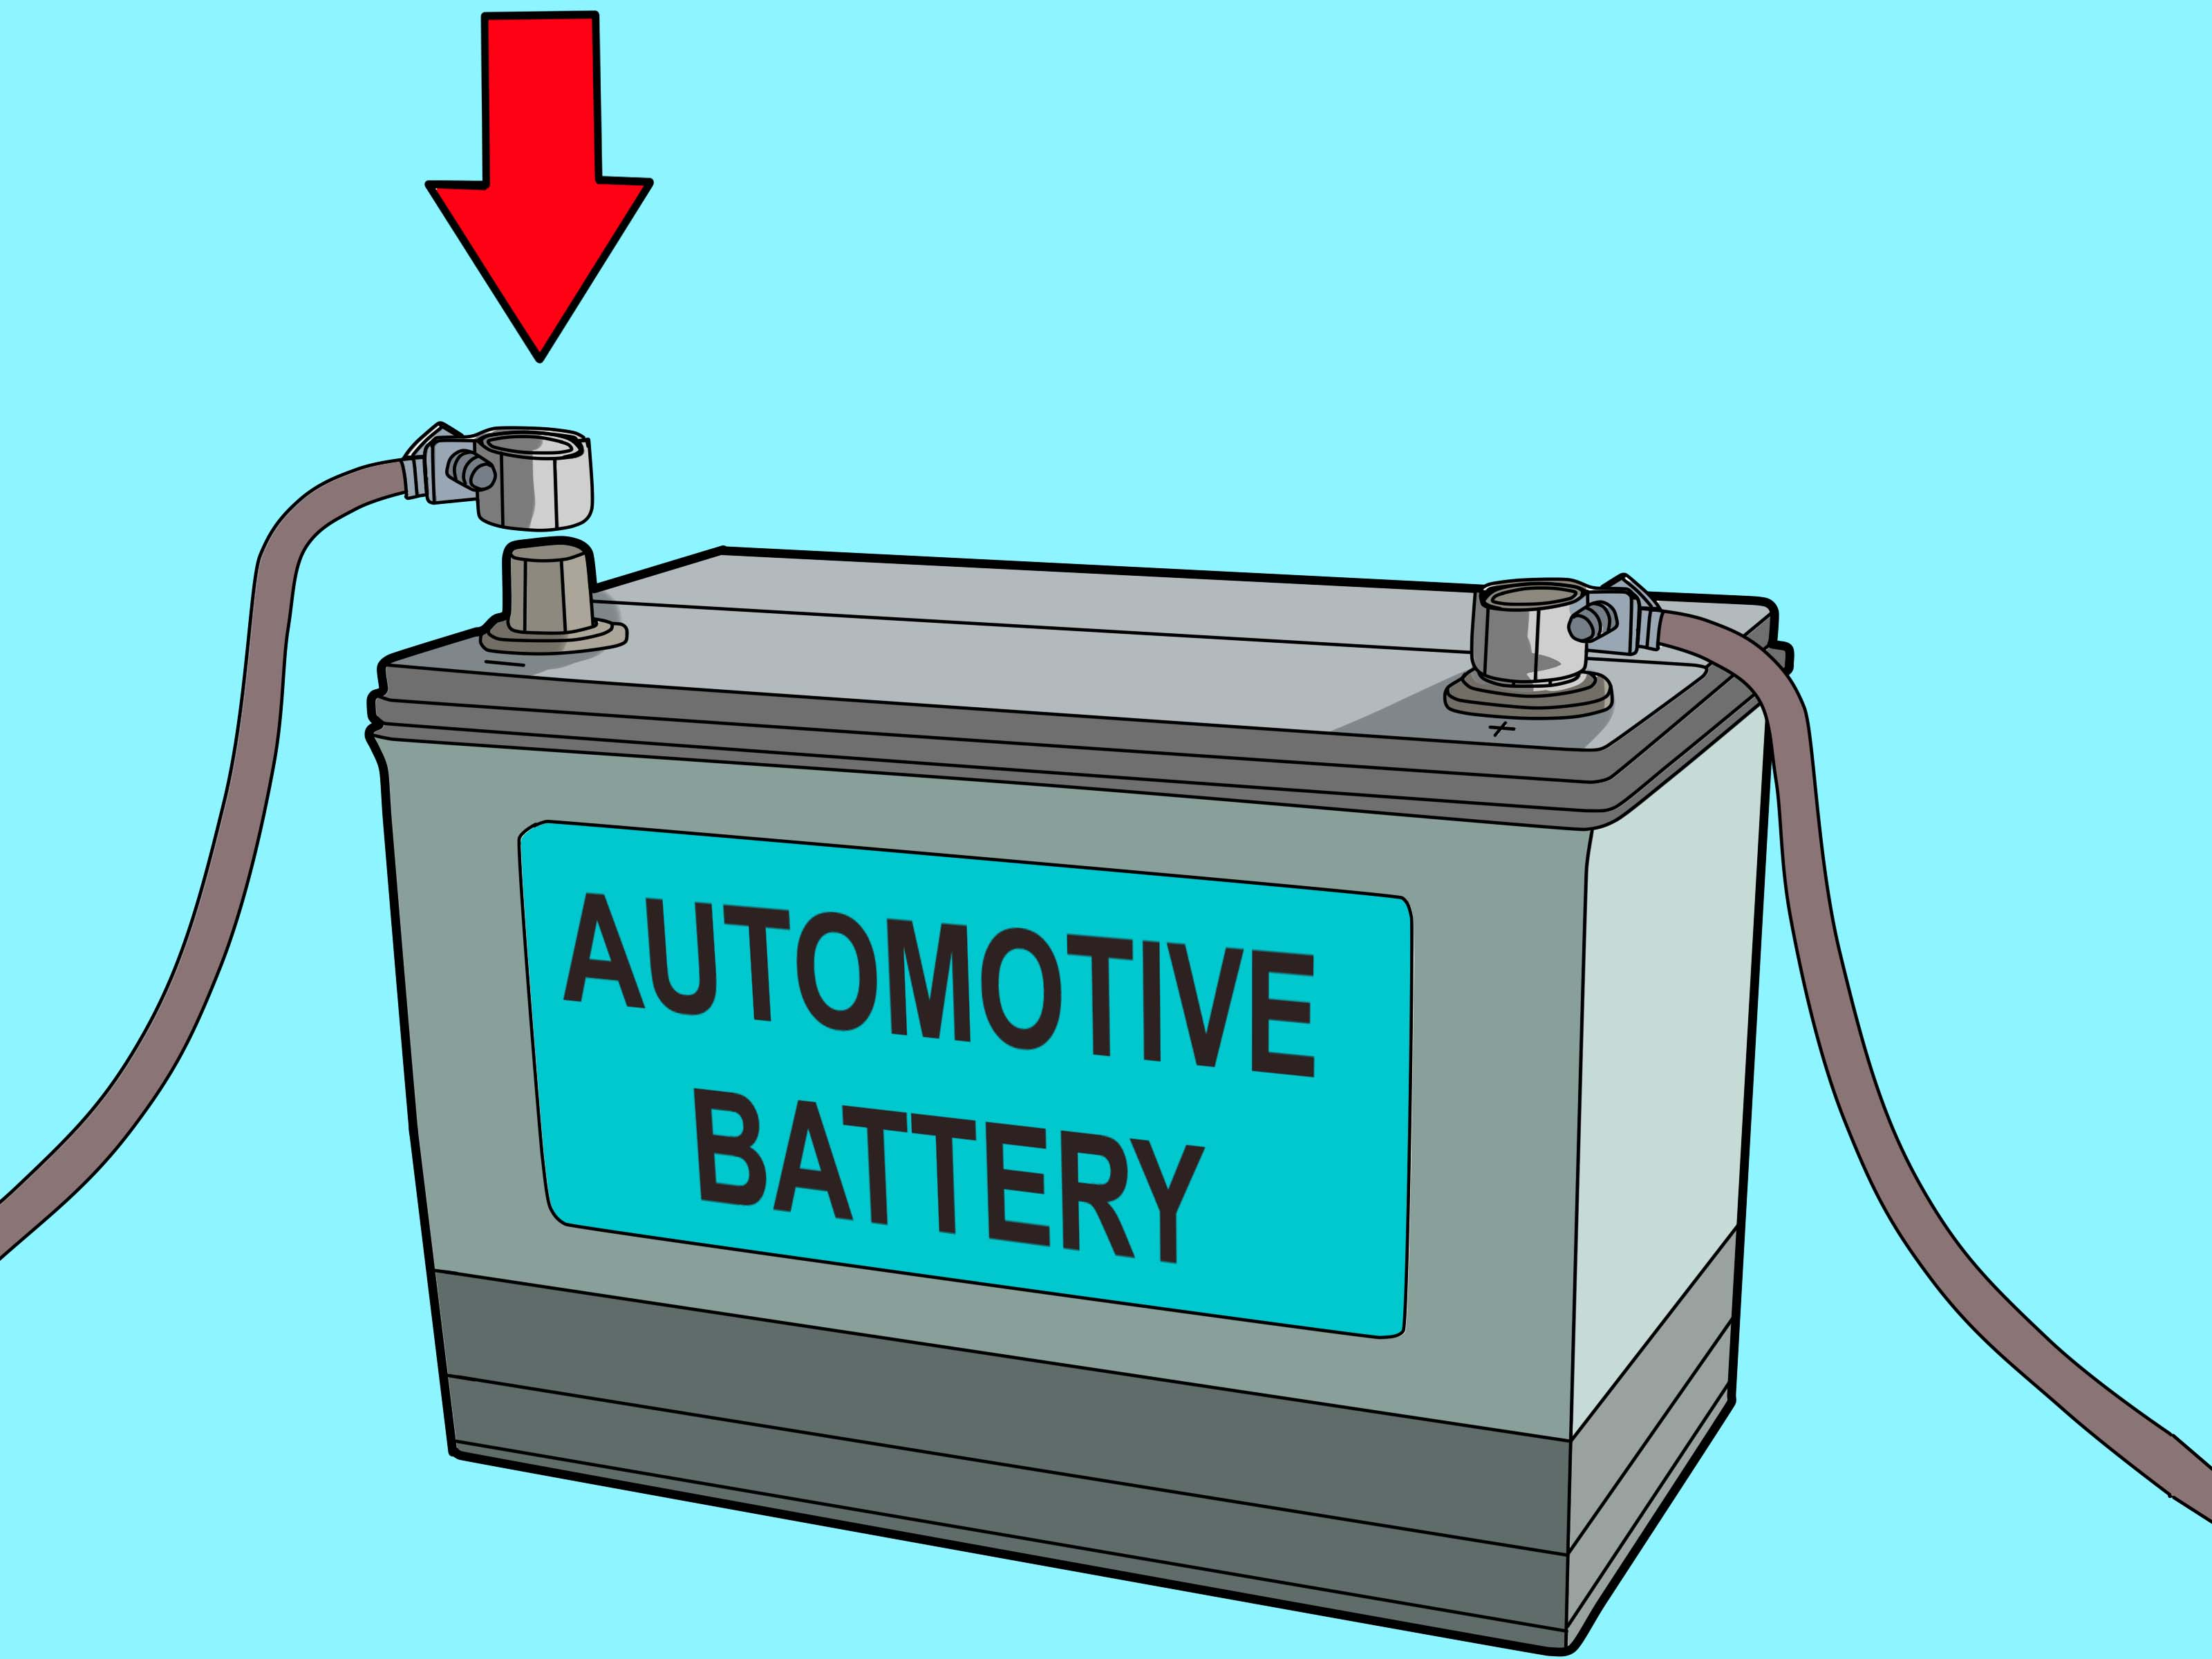 How To Install A Car Volt Amp Gauge (With Pictures) - Wikihow - Ampere Gauge Wiring Diagram